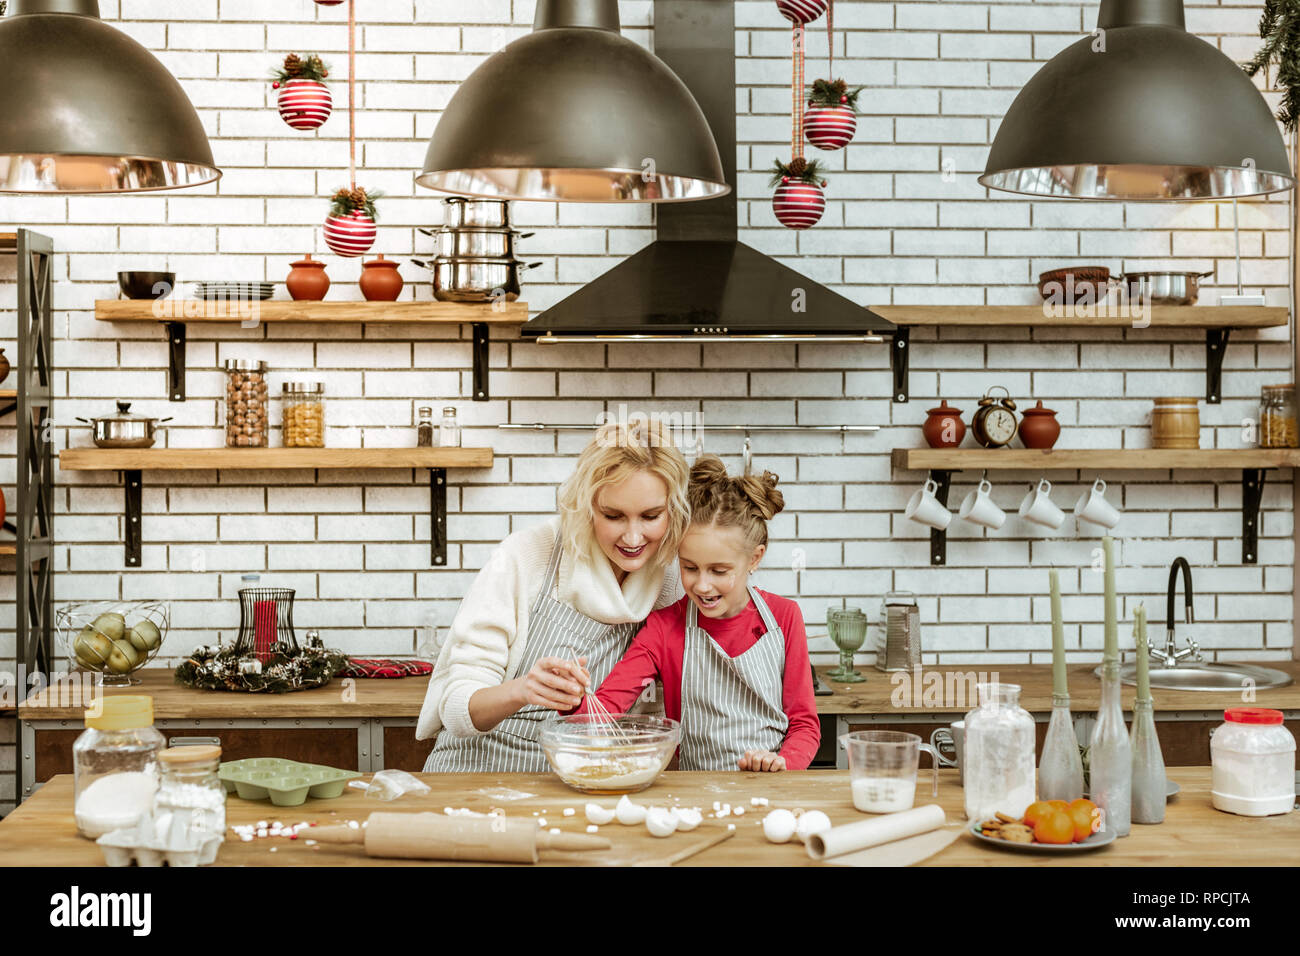 Smiling blonde lady sitting with daughter in stylish filled kitchen Stock Photo